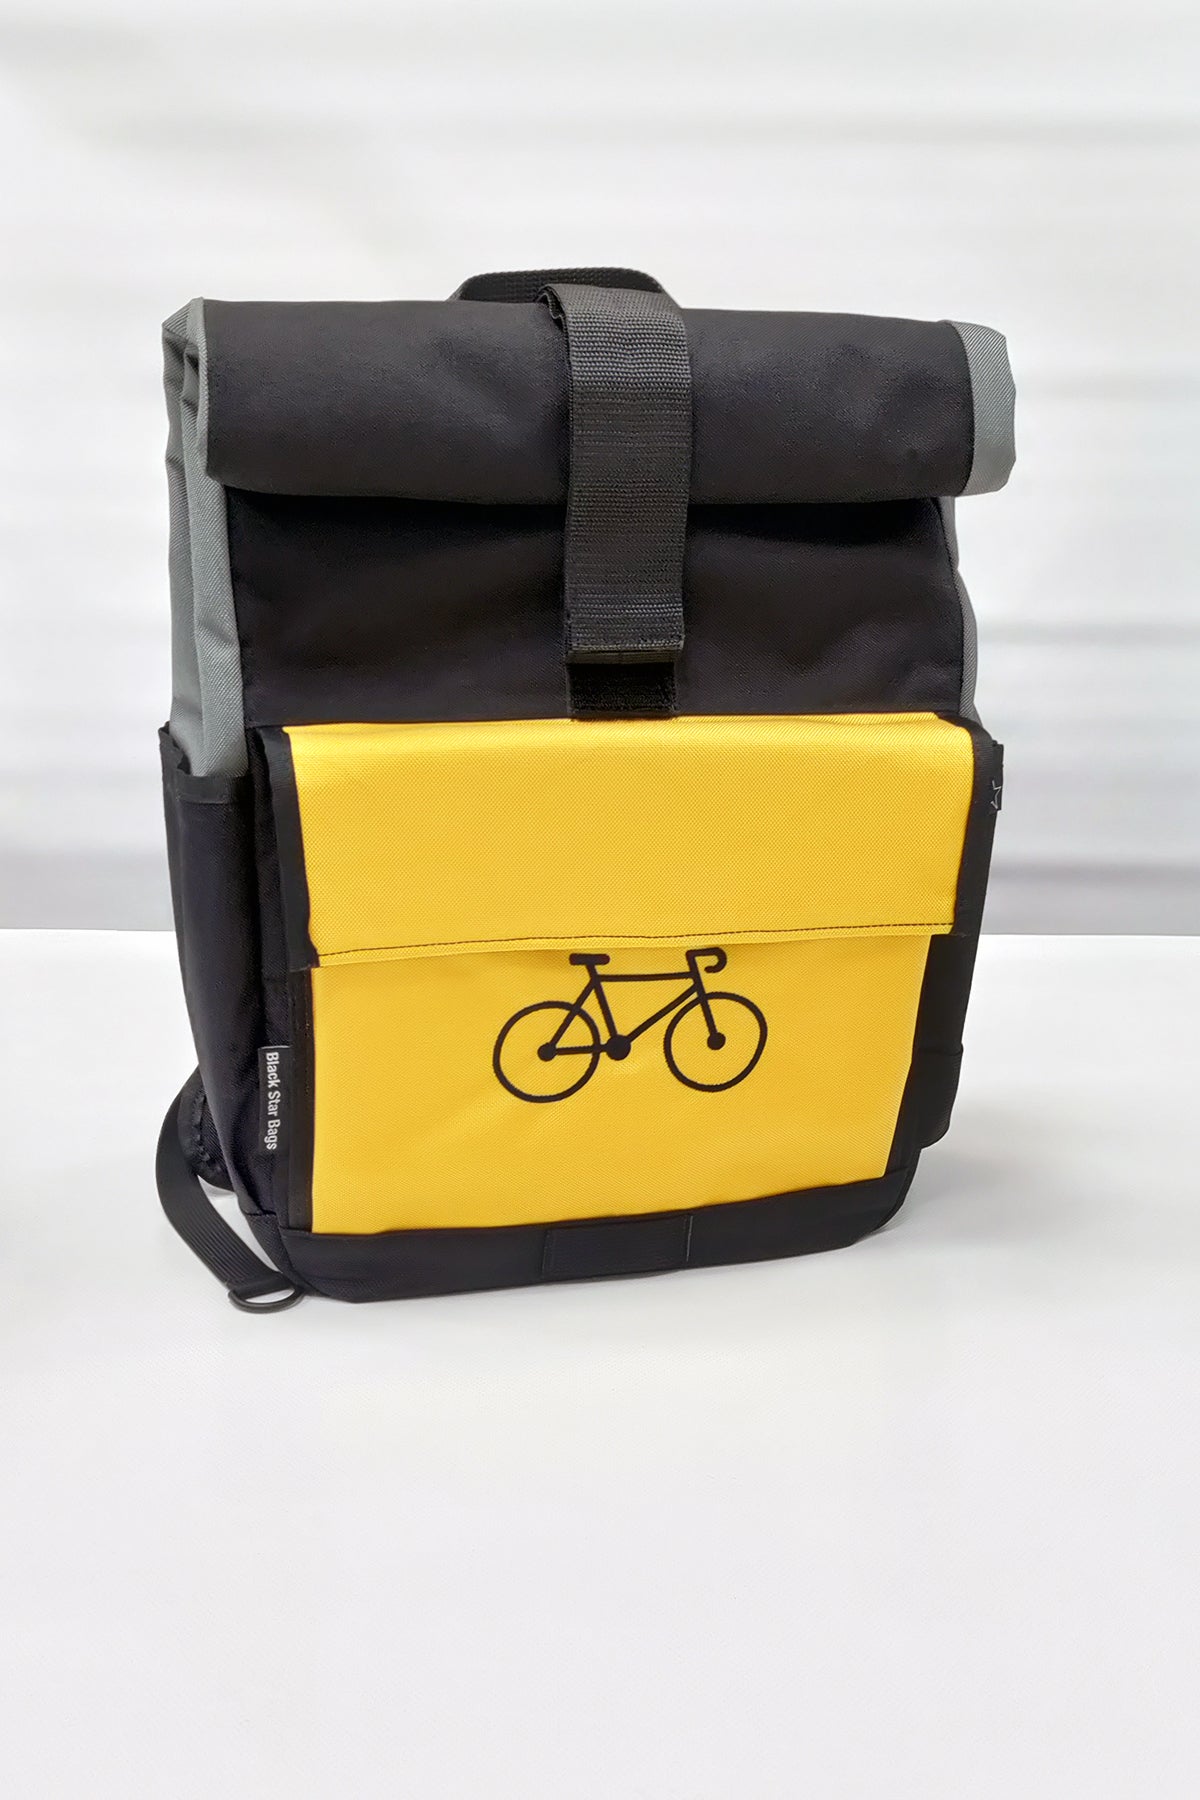 Bike Pannier (Messenger Bag) by Anhaica Bag Works — Tools and Toys